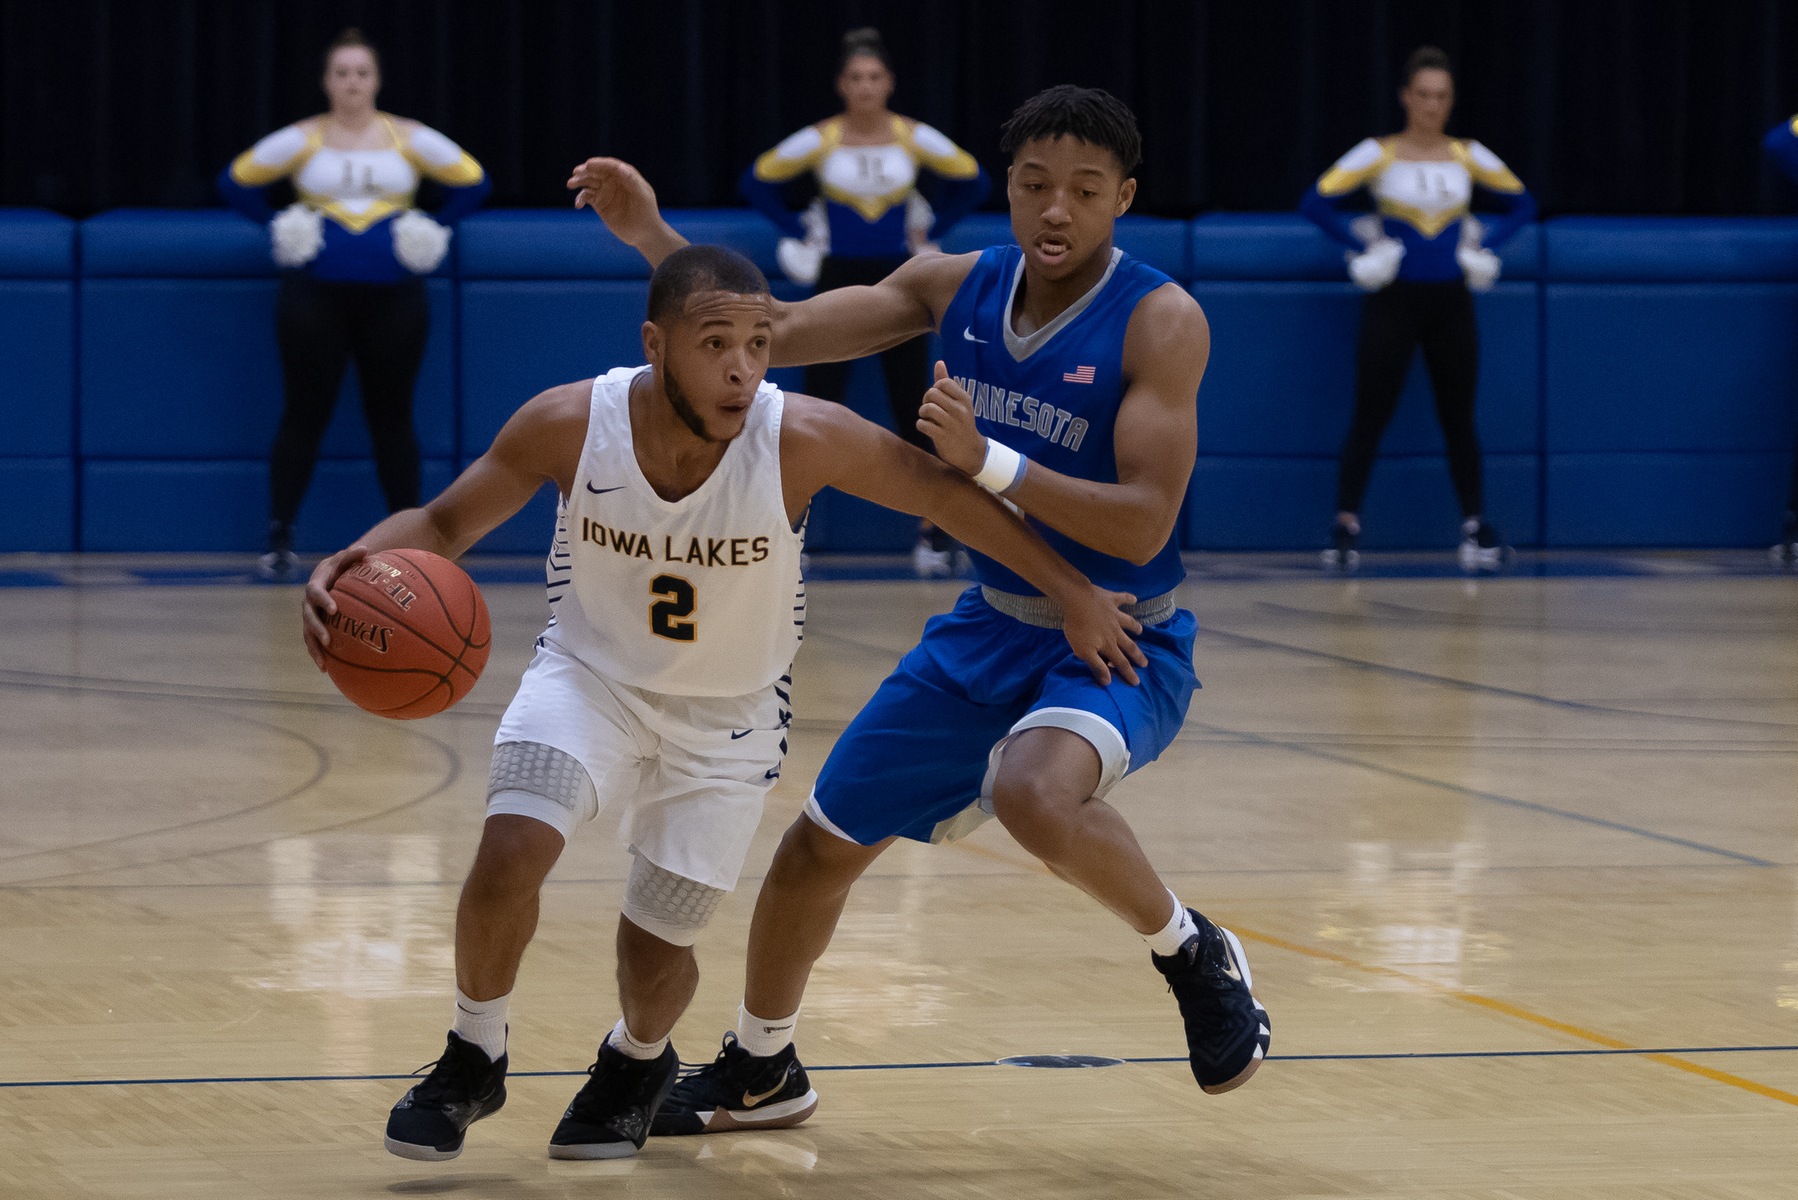 Lakers win at 10th ranked NIACC